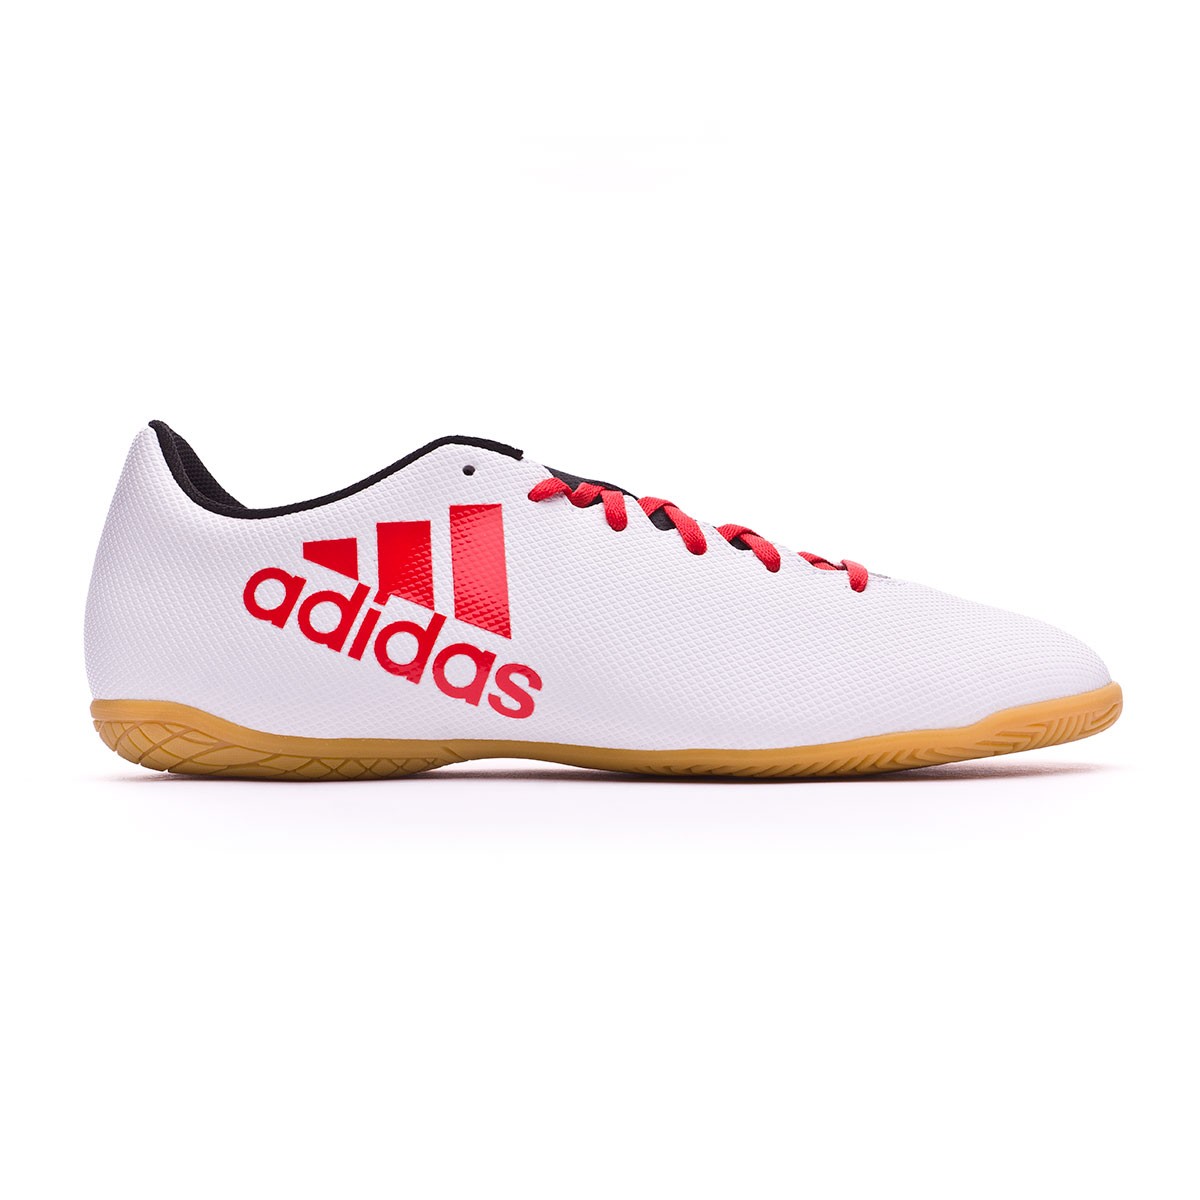 Zapatilla adidas X Tango 17.4 IN Grey-Real coral-Core black - Leaked soccer